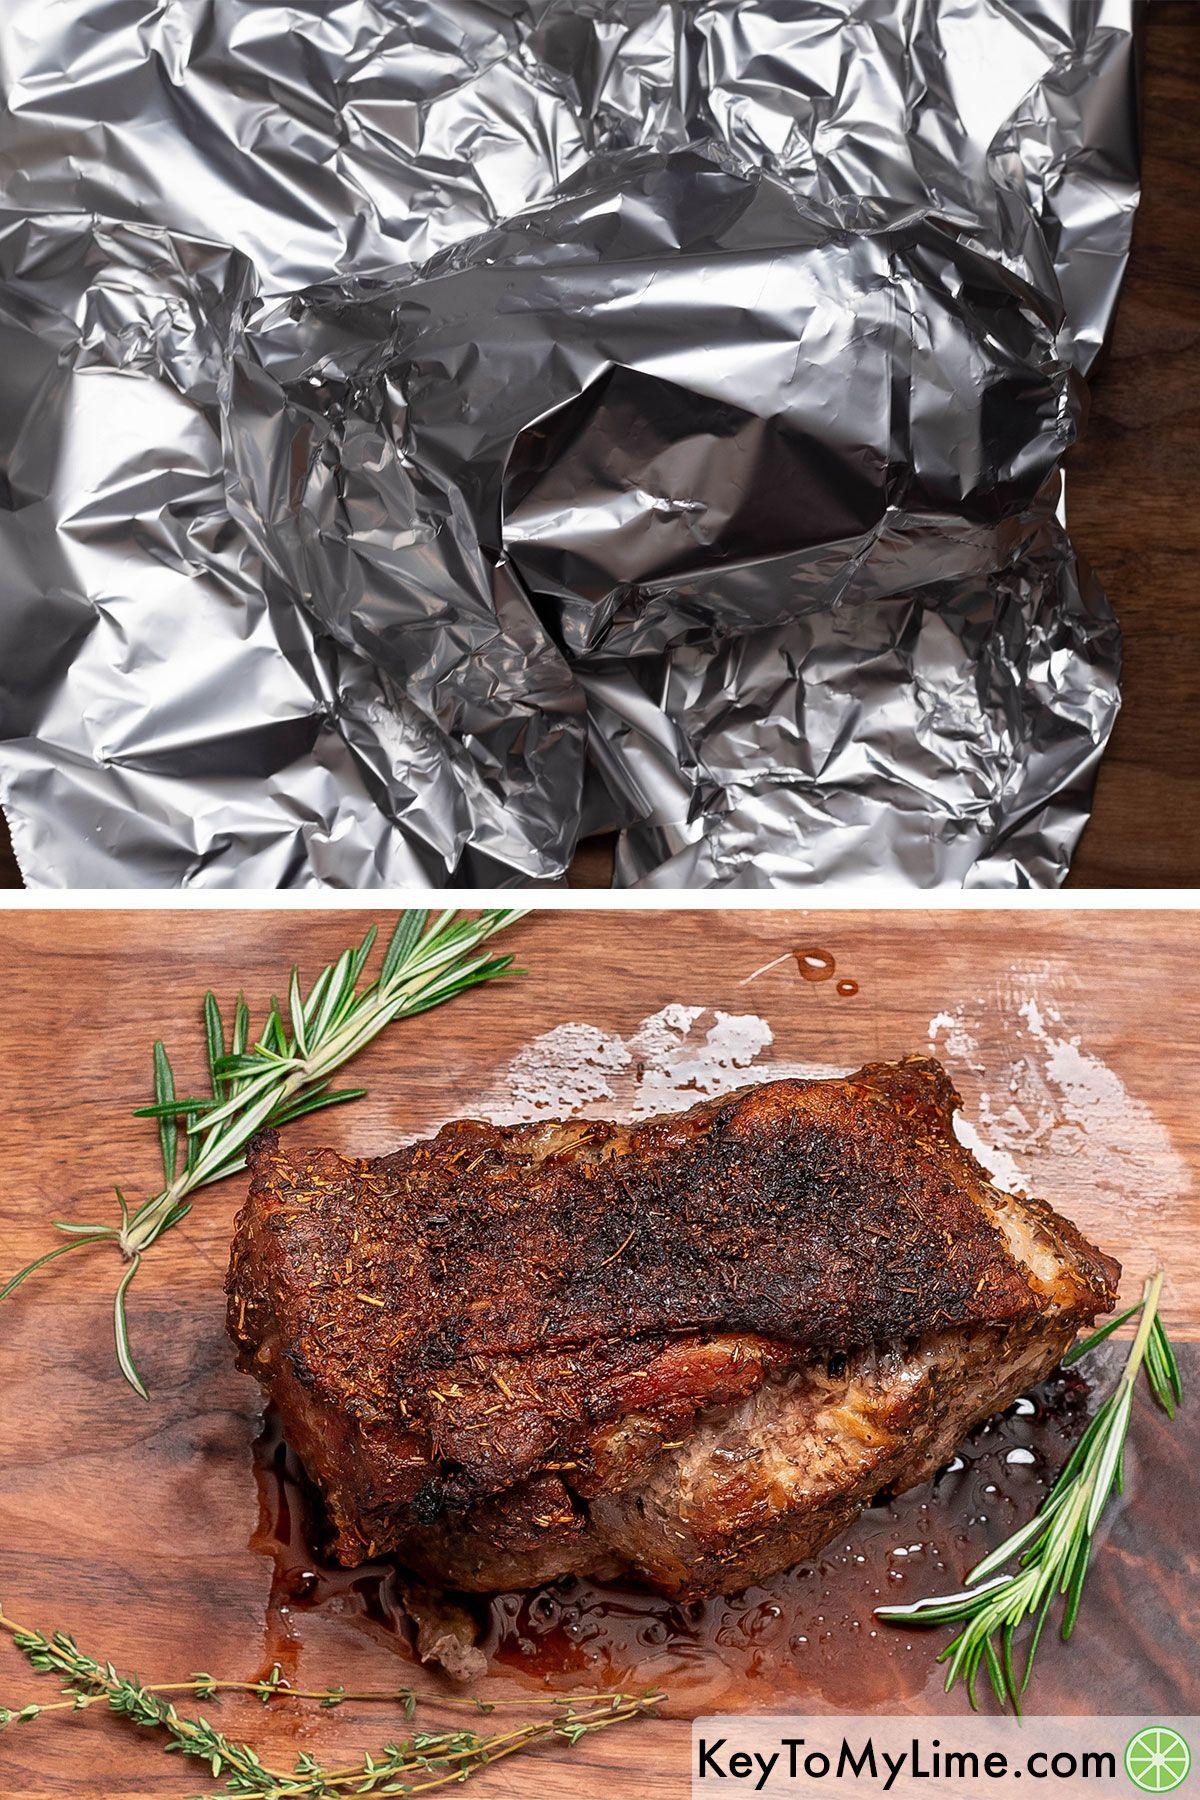 Covering the roast with aluminum foil and resting on a cutting board.